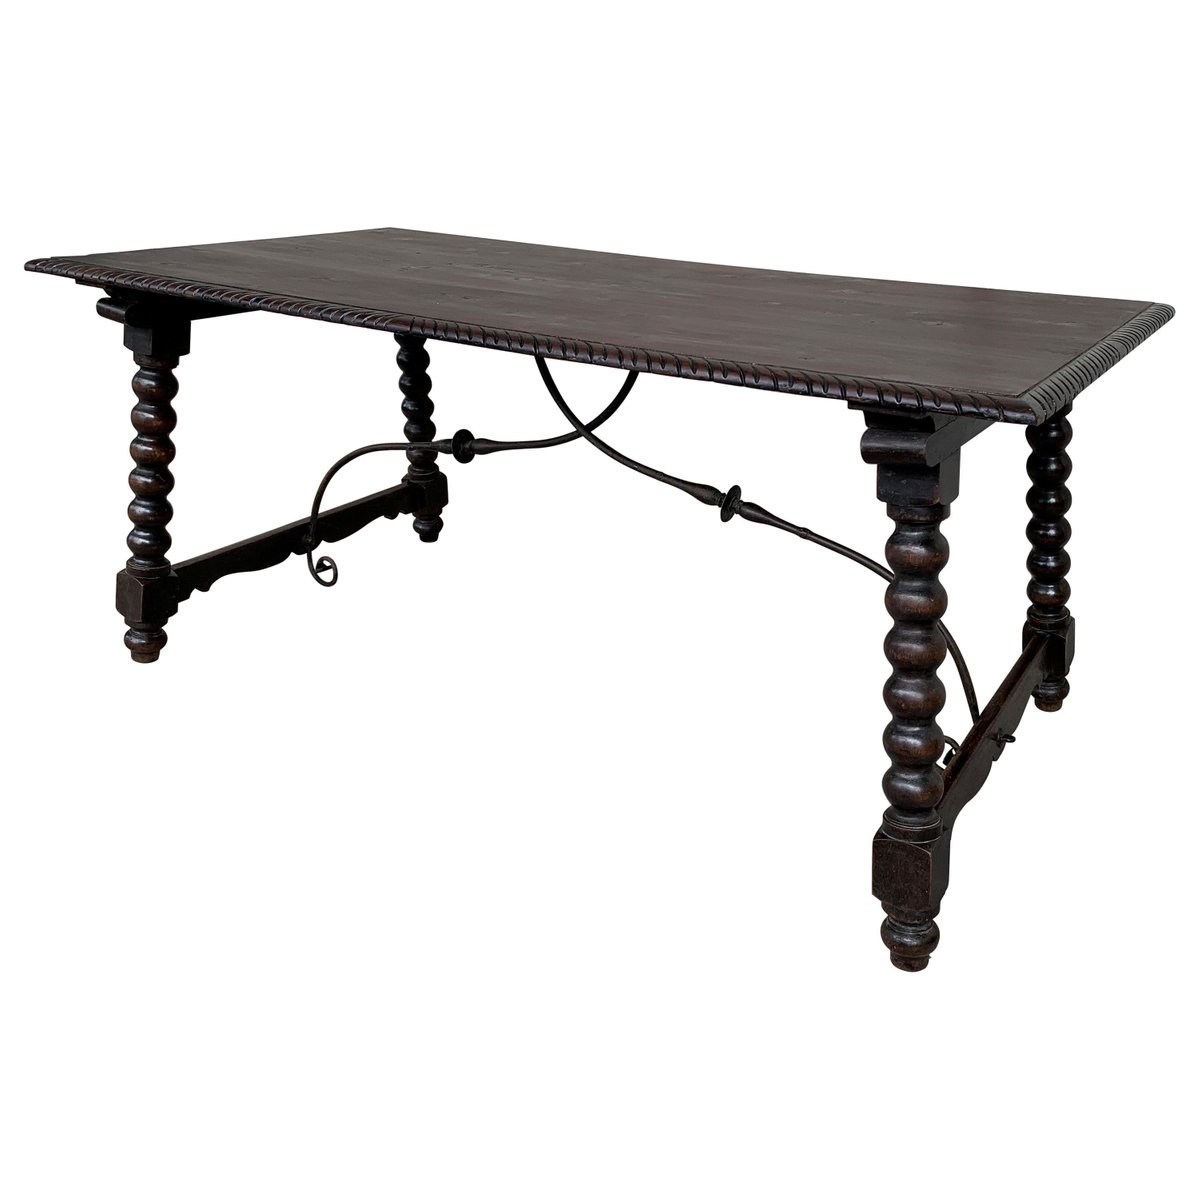 19th baroque spanish farm trestle lyre leg dining room table with forged iron PSK-1002972